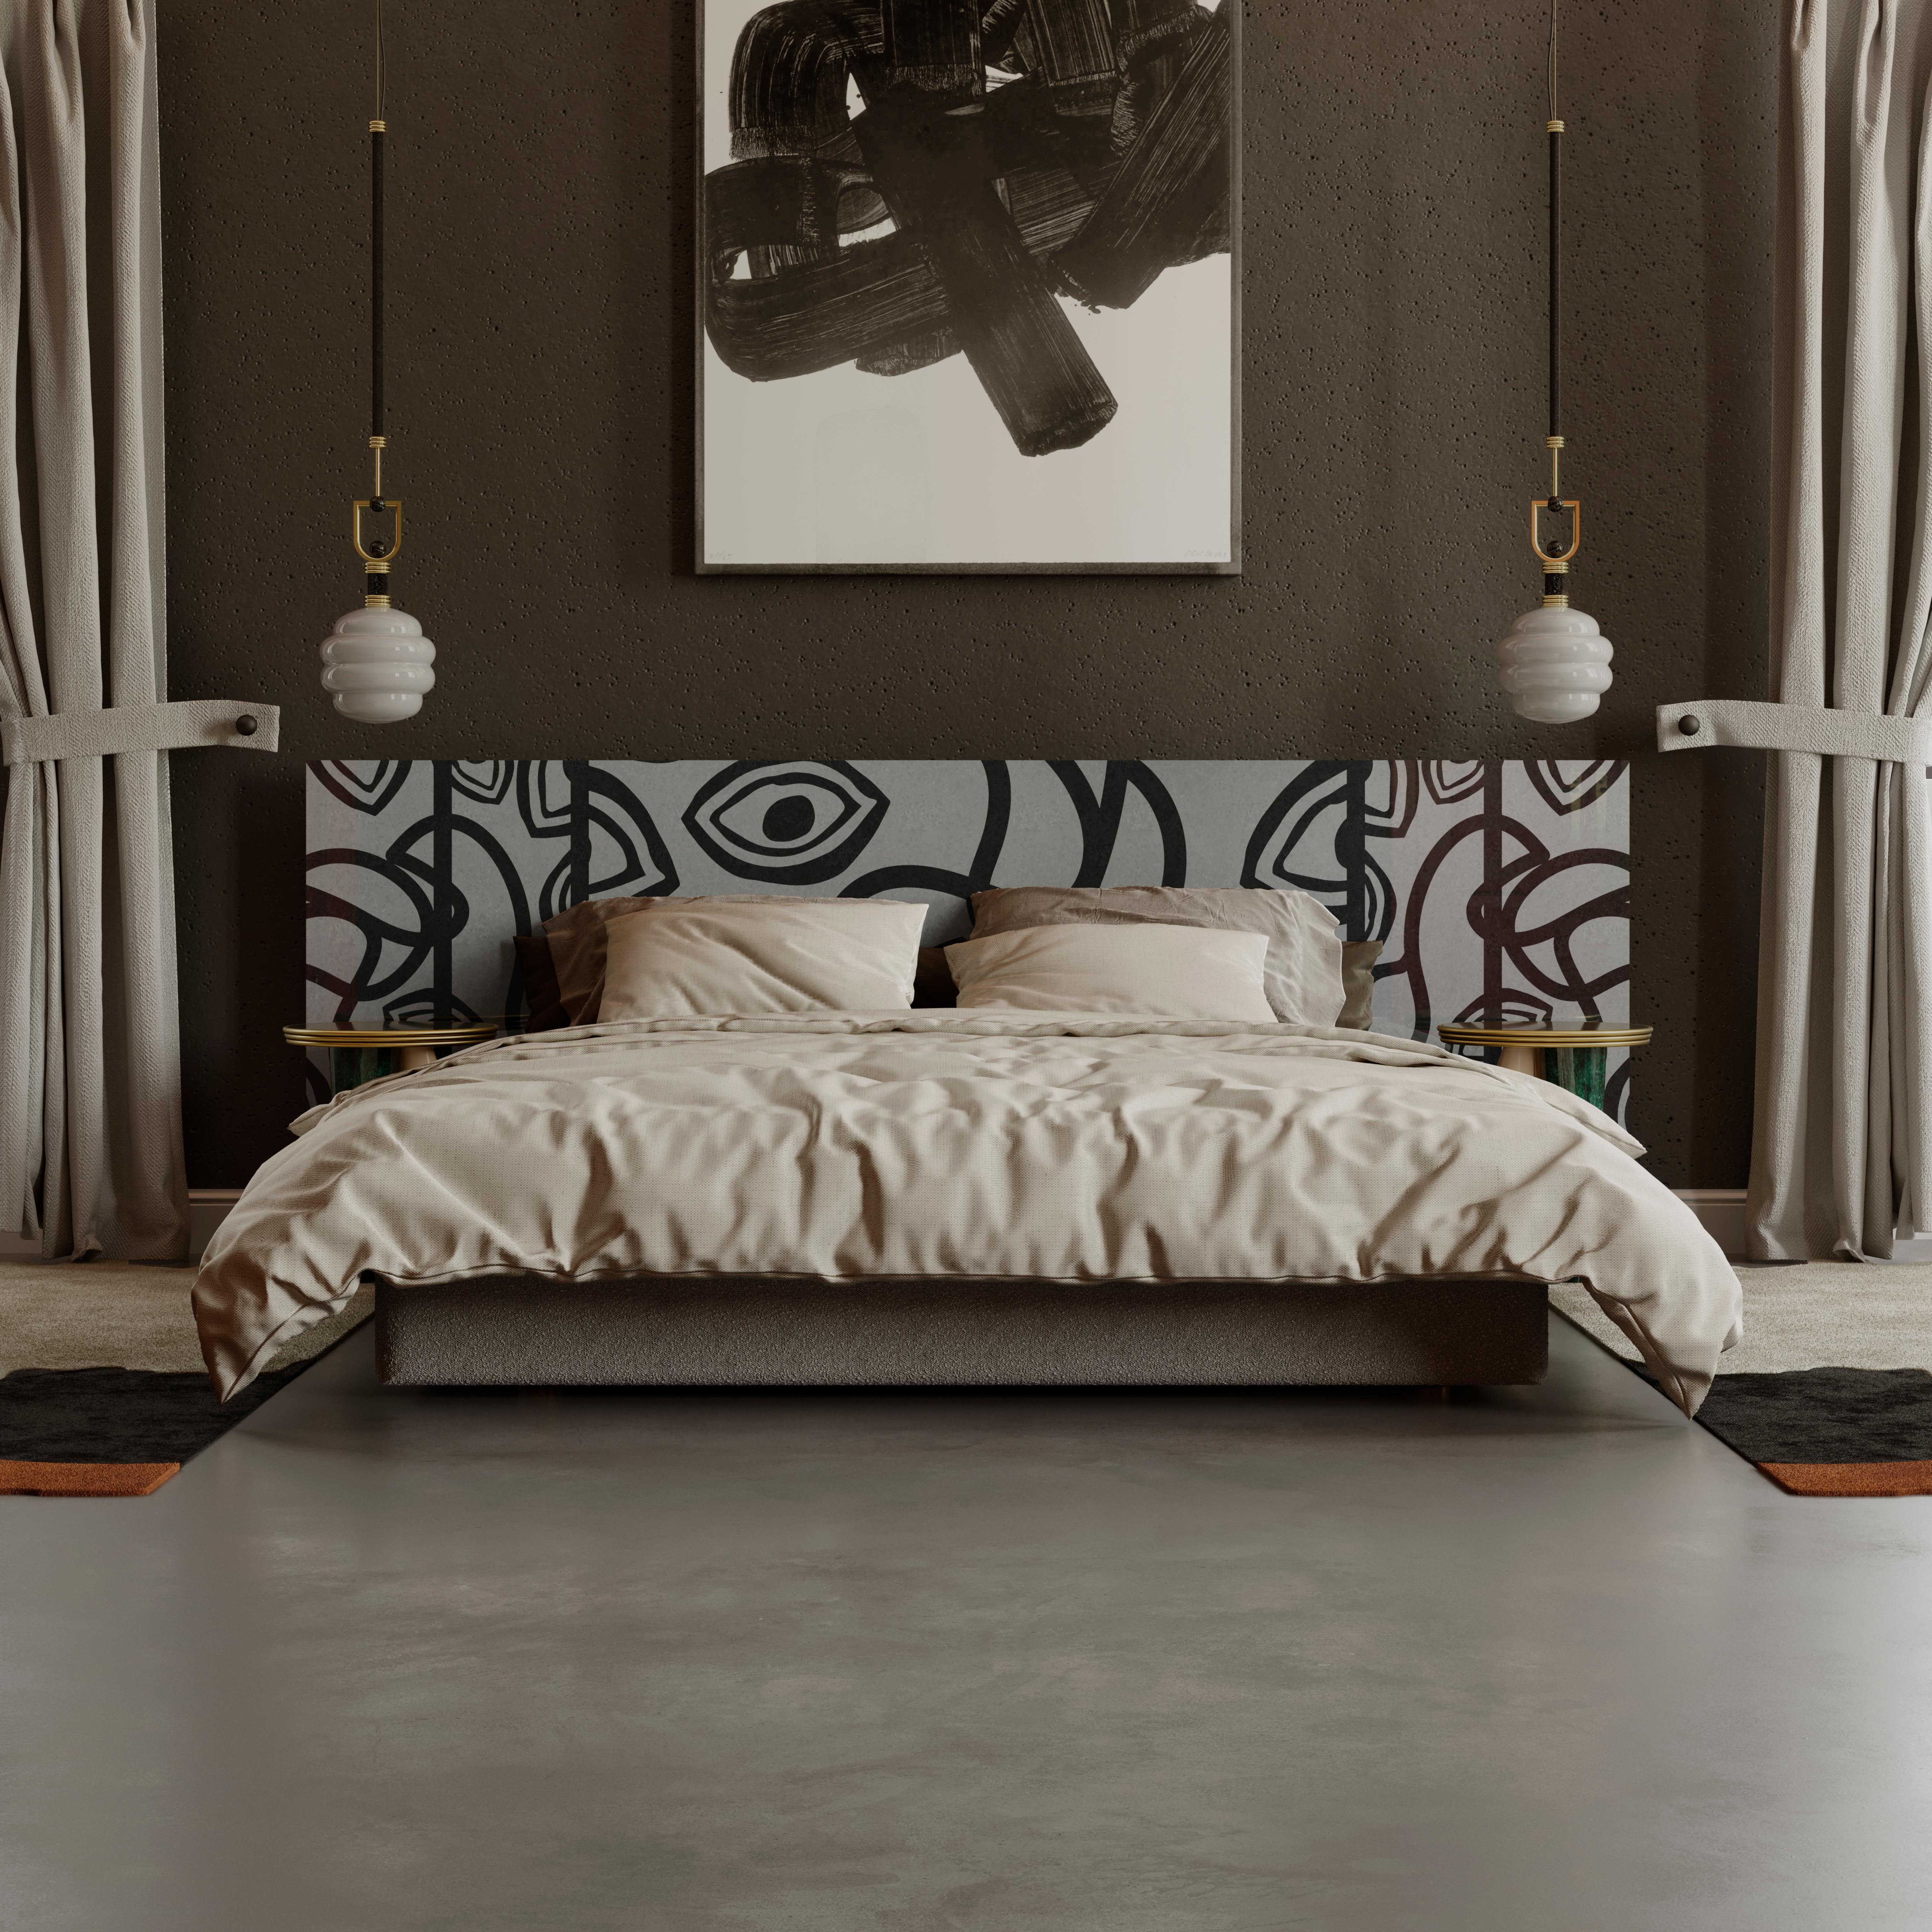 Ruiz Bed is meticulously hand-crafted and boldly adorned with a modern marquetry pattern. Its dynamic, cubist pattern is ideal for minimalist or mid-century modern bedrooms. This captivating and modern bed is exquisitely designed. It features a